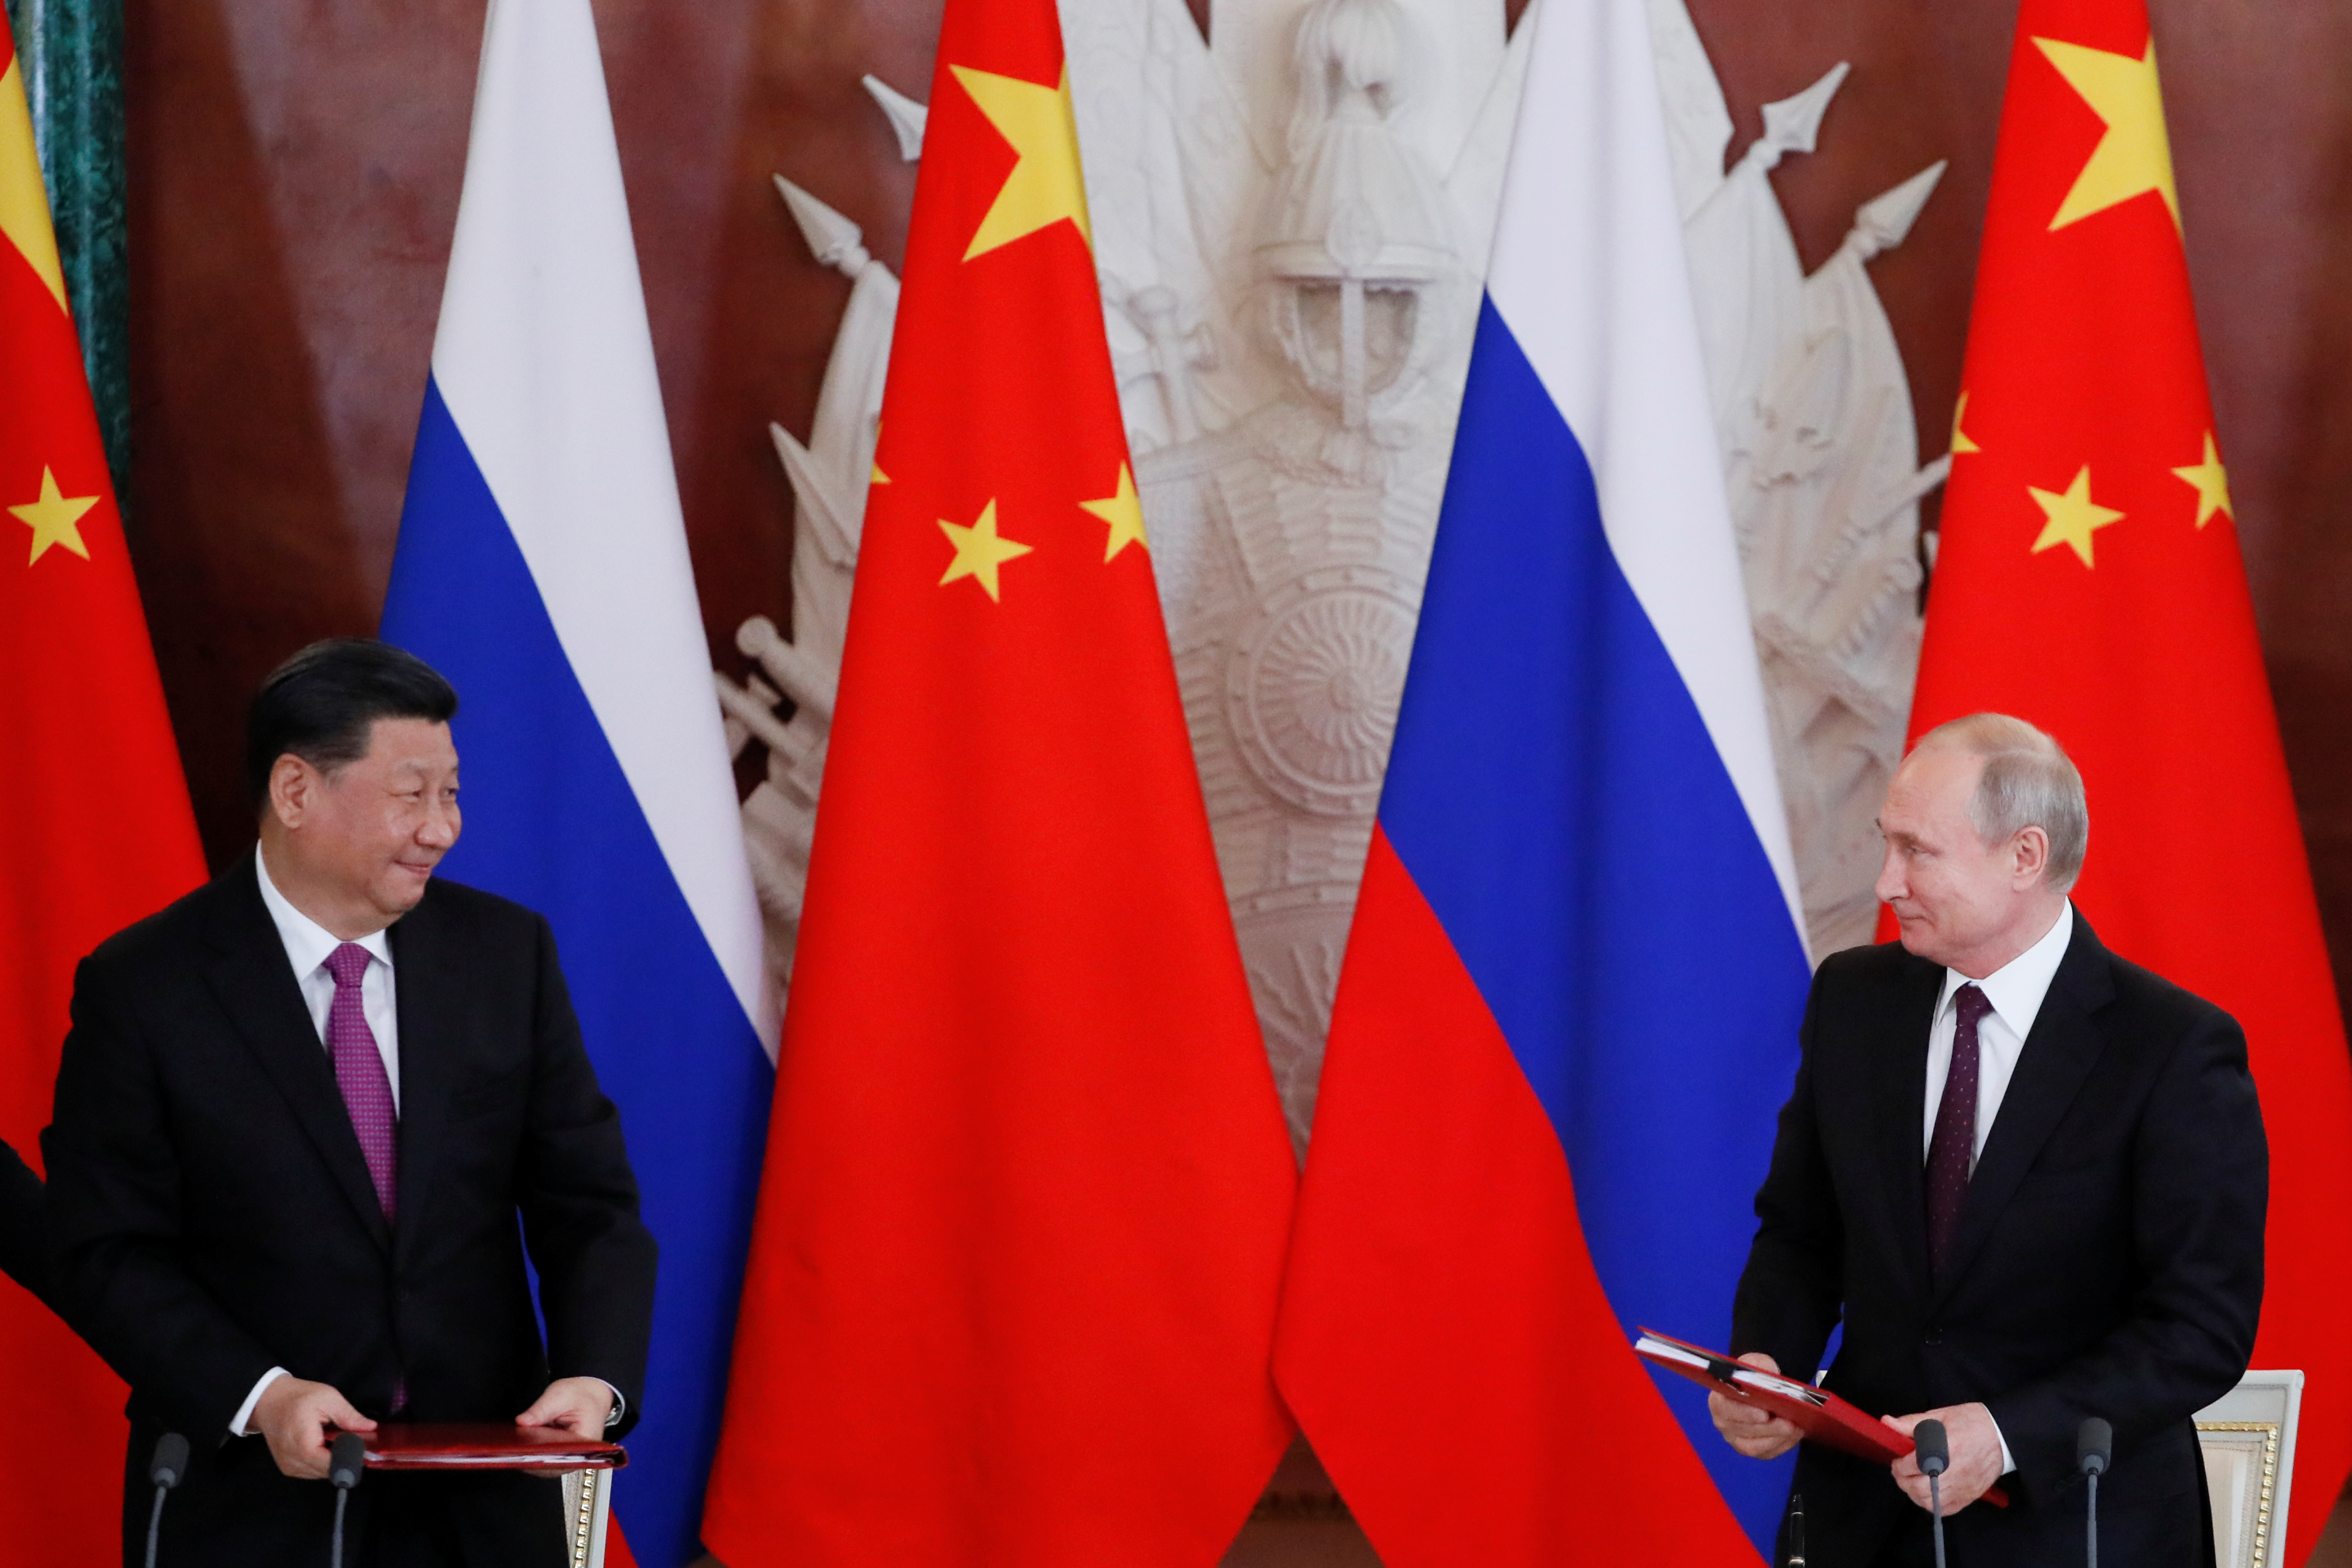 Russia and China: Axis of revisionists?